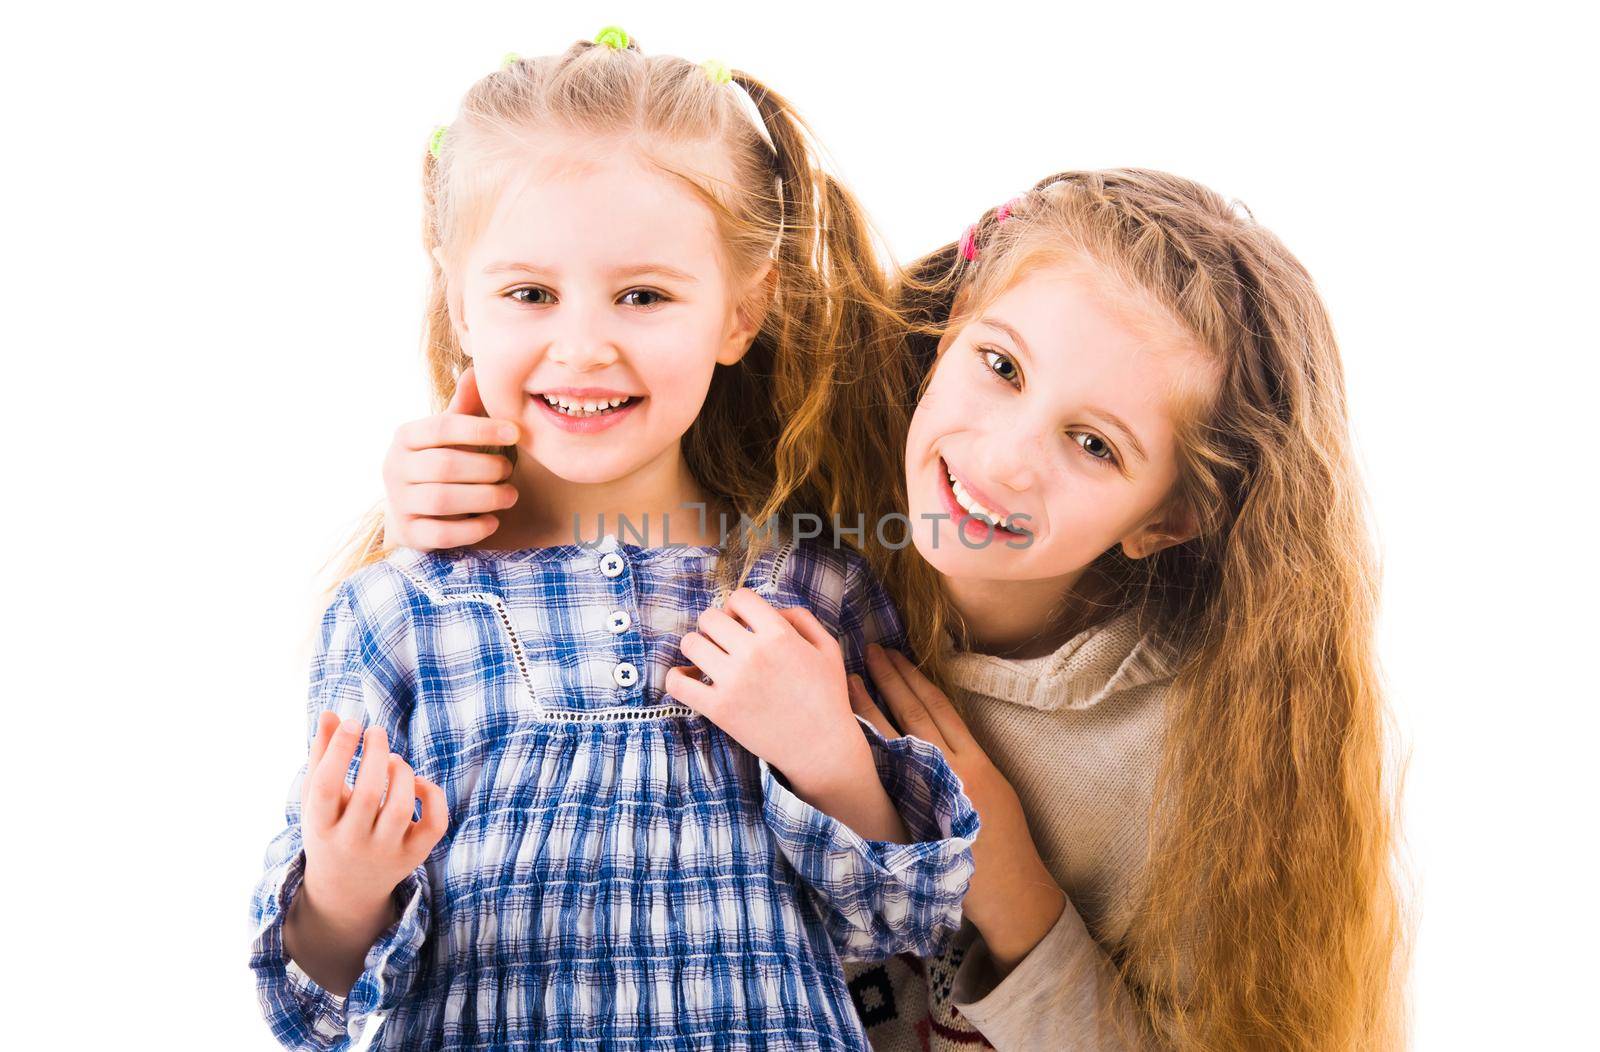 Two lovely happy girls playing and relaxing together isolated on white background. Two friends having fun